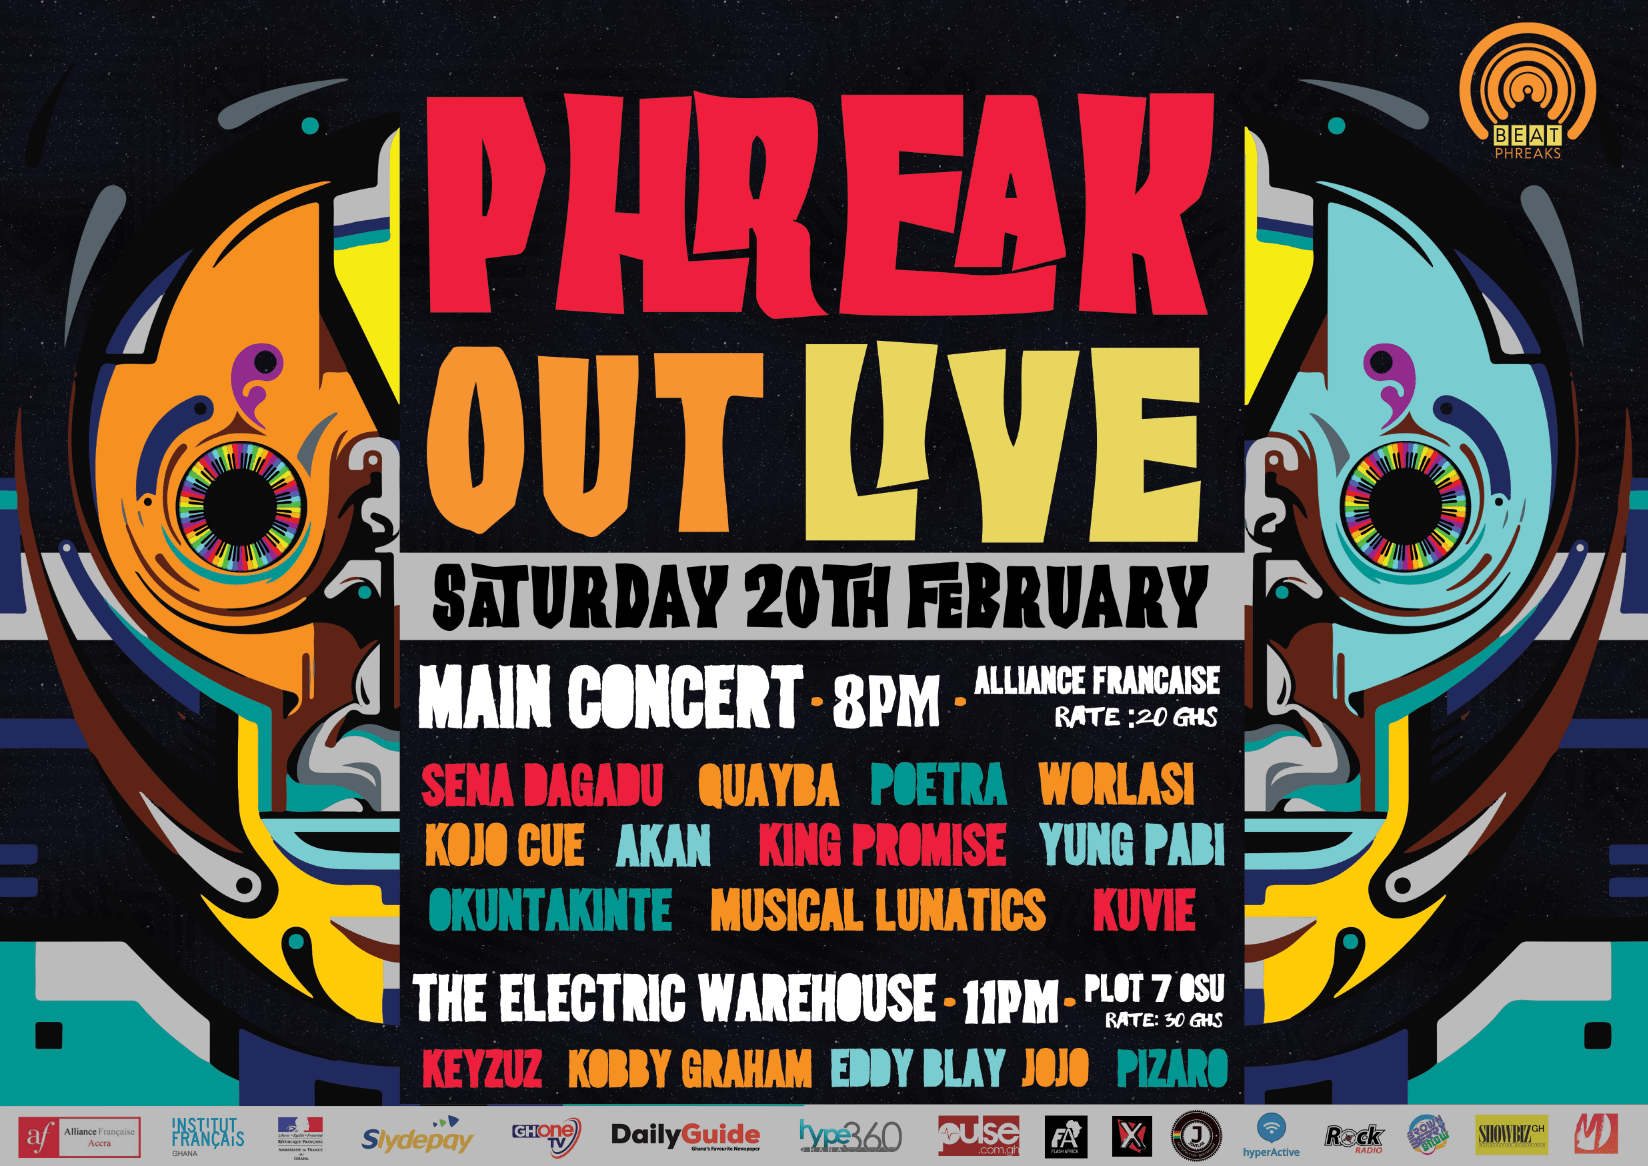 PHREAK OUT LIVE OFFICIAL POSTER